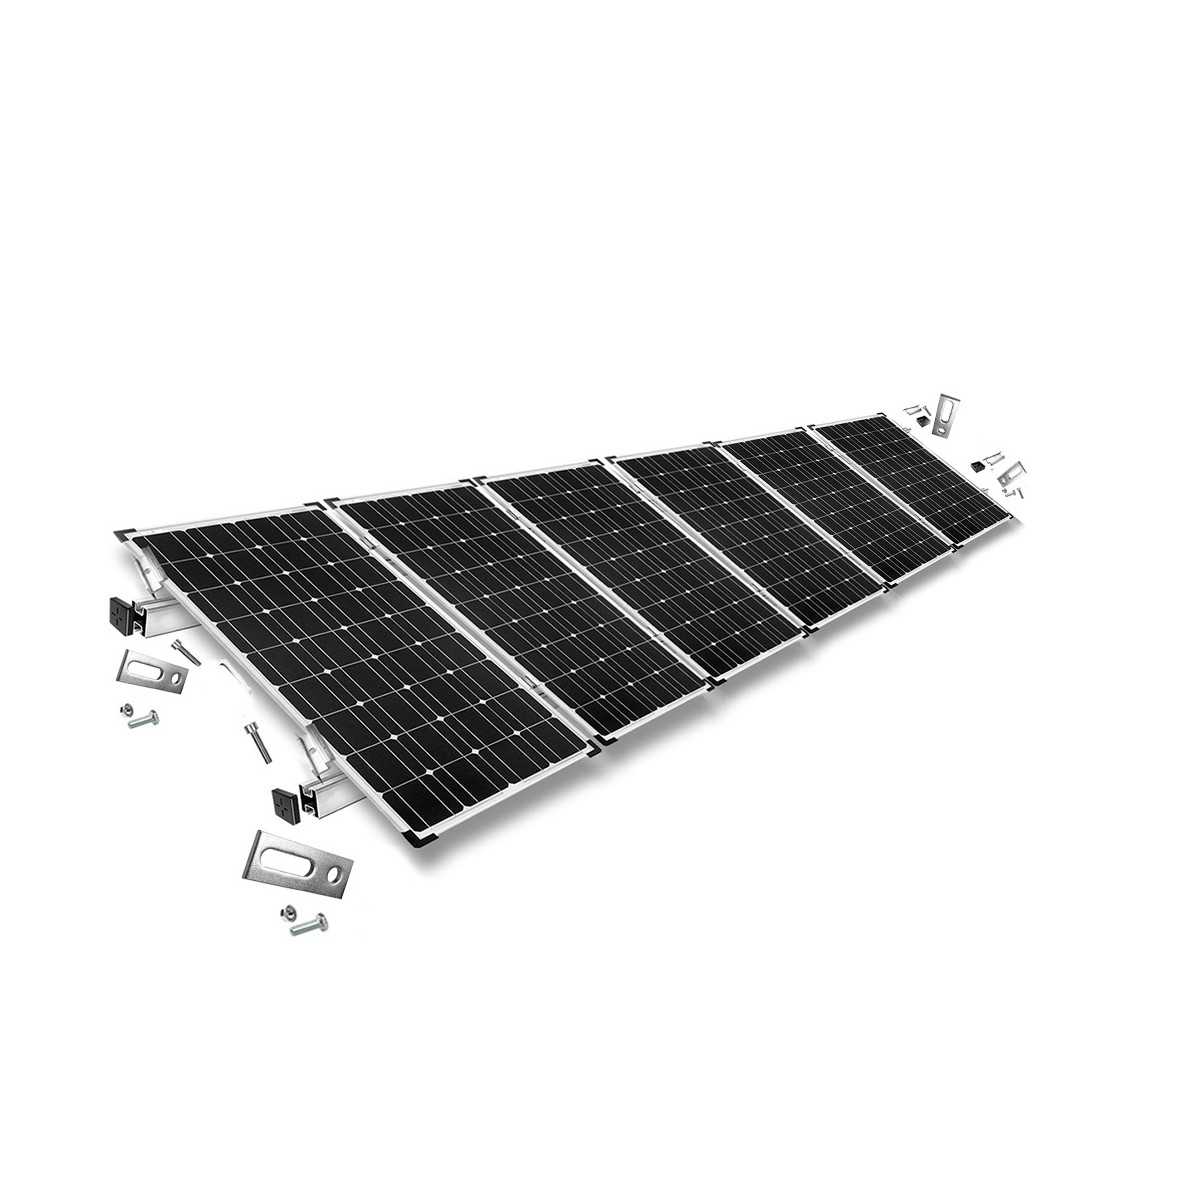 Mounting kit h35 with roof studs for pitched roof 6 solar panels frame 35 mm